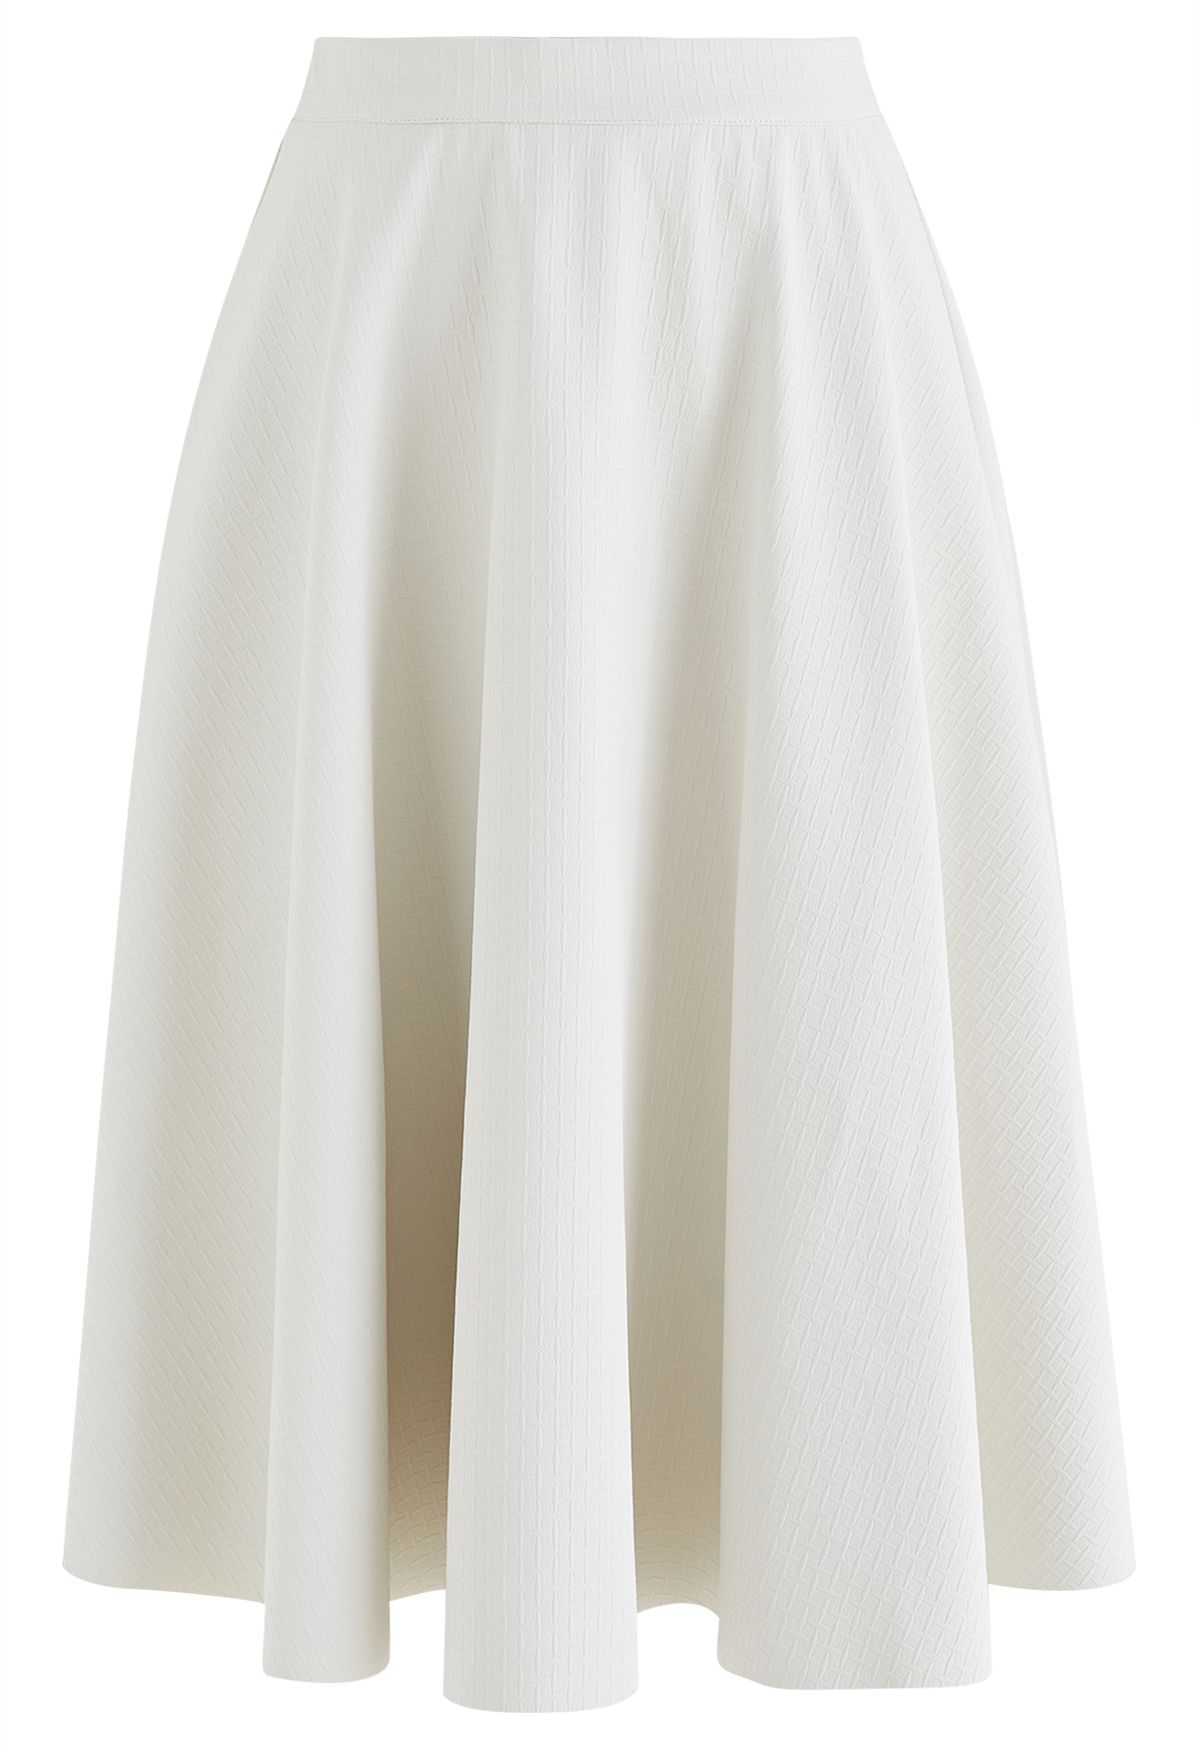 Faux Leather Textured Midi Skirt in Ivory